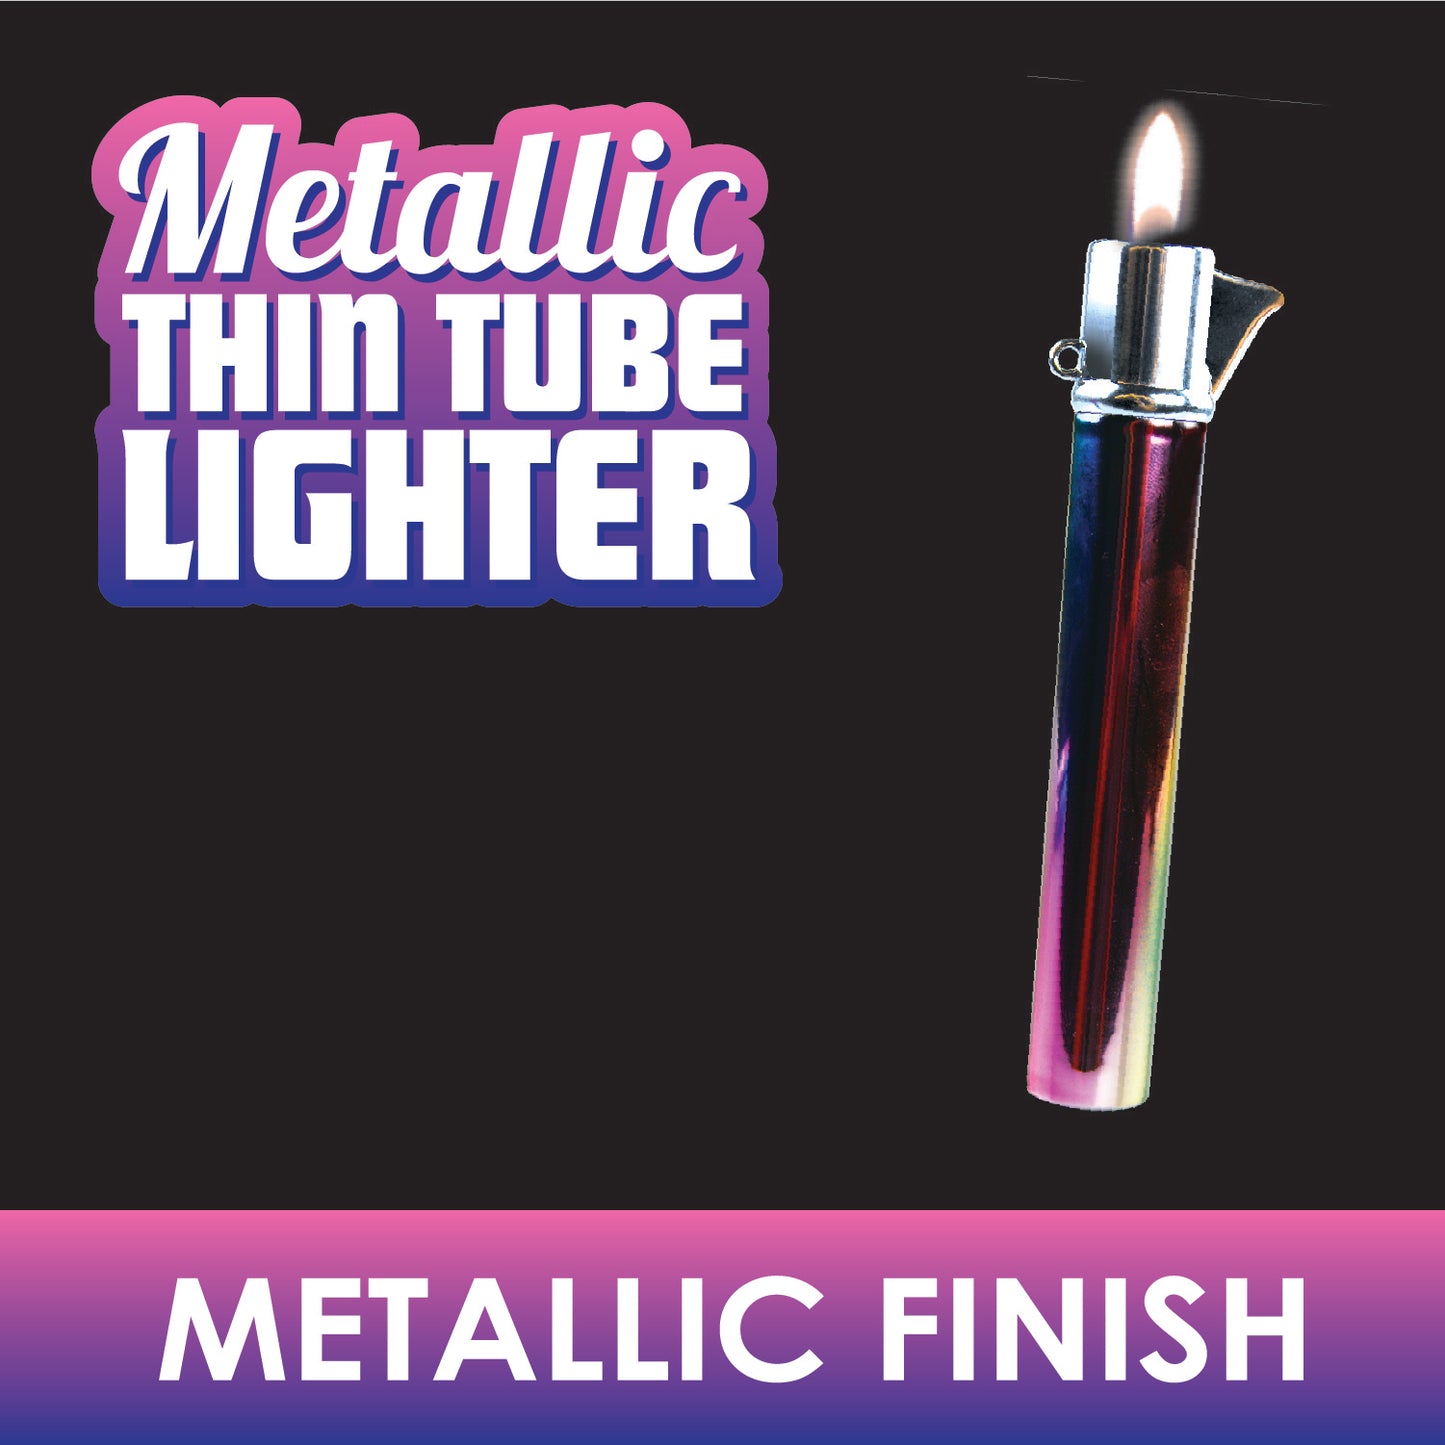 ITEM NUMBER 026642 THIN TUBE LIGHTER 12 PIECES PER DISPLAY